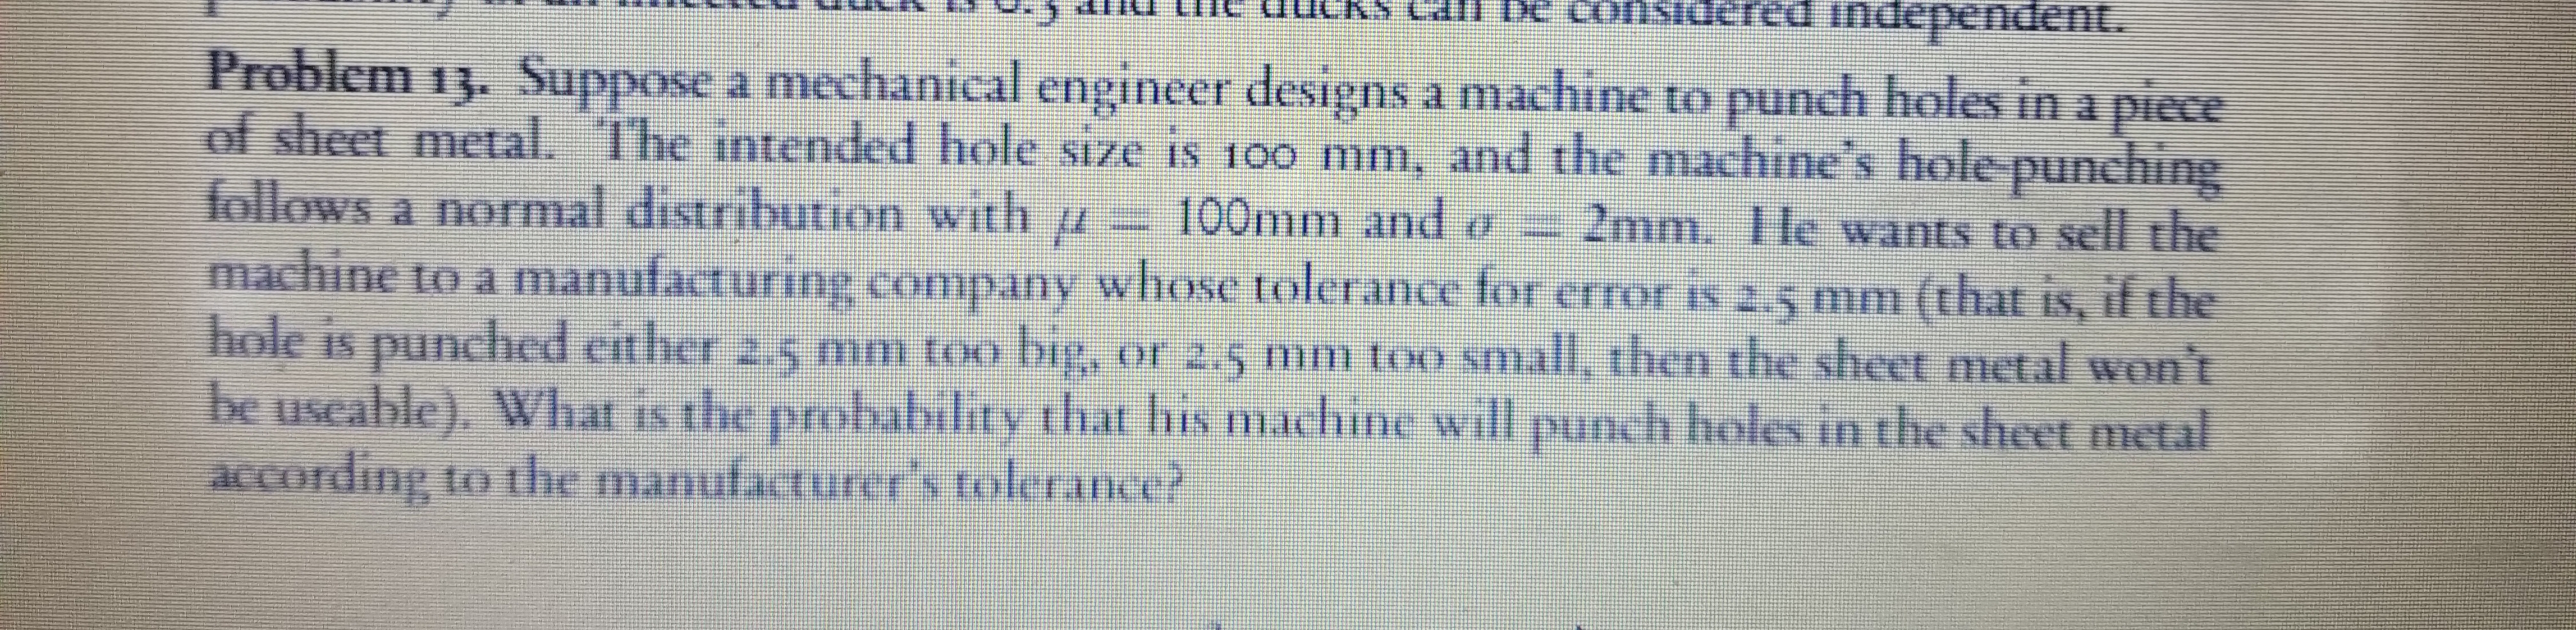 red independent.
Problem 13. Suppose a mechanical engineer designs a machine to punch holes in
of sheet metal. The intended hole size is 1o0 mm, and the machine's hole punching
follows a normal distribution with u
machine to a manufacturing company whose tolerance for error is 2.5 mm (that is, if the
hole is
be useable), Whar is tlie probability that his machine will punch hols in the sheet metal
according to the manufacturer's tolerance?
piece
100mm and o
2mm. IHe wants to sell the
IS,
punched esther 2.5 mm too big, or 2,5 mm too snall, then the sheet metal won't
